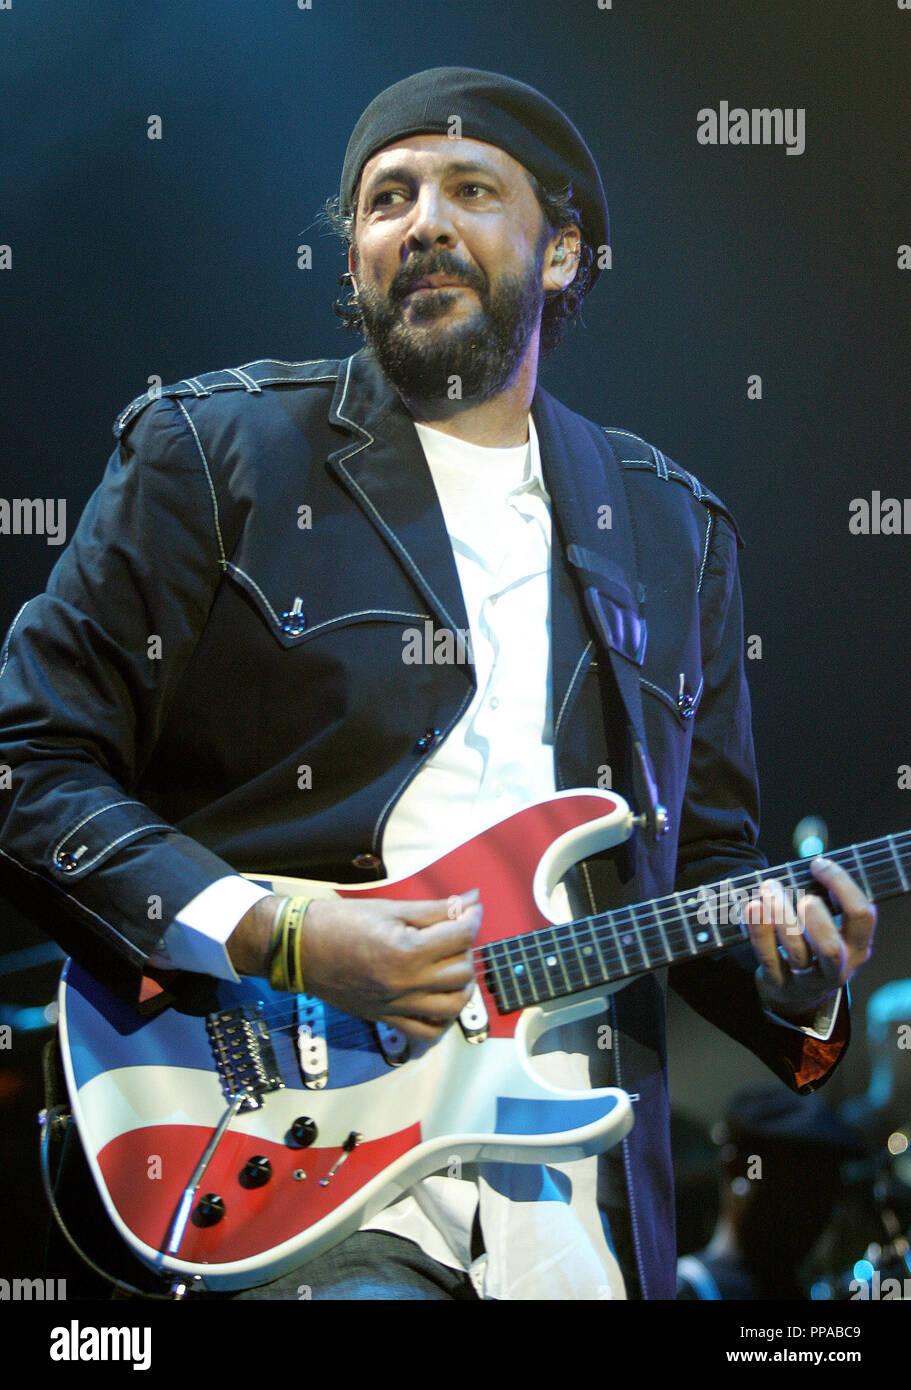 Juan Luis Guerra performs in concert at the Seminole Hard Rock Hotel and Casino in Hollywood, Florida on June 26, 2009. Stock Photo